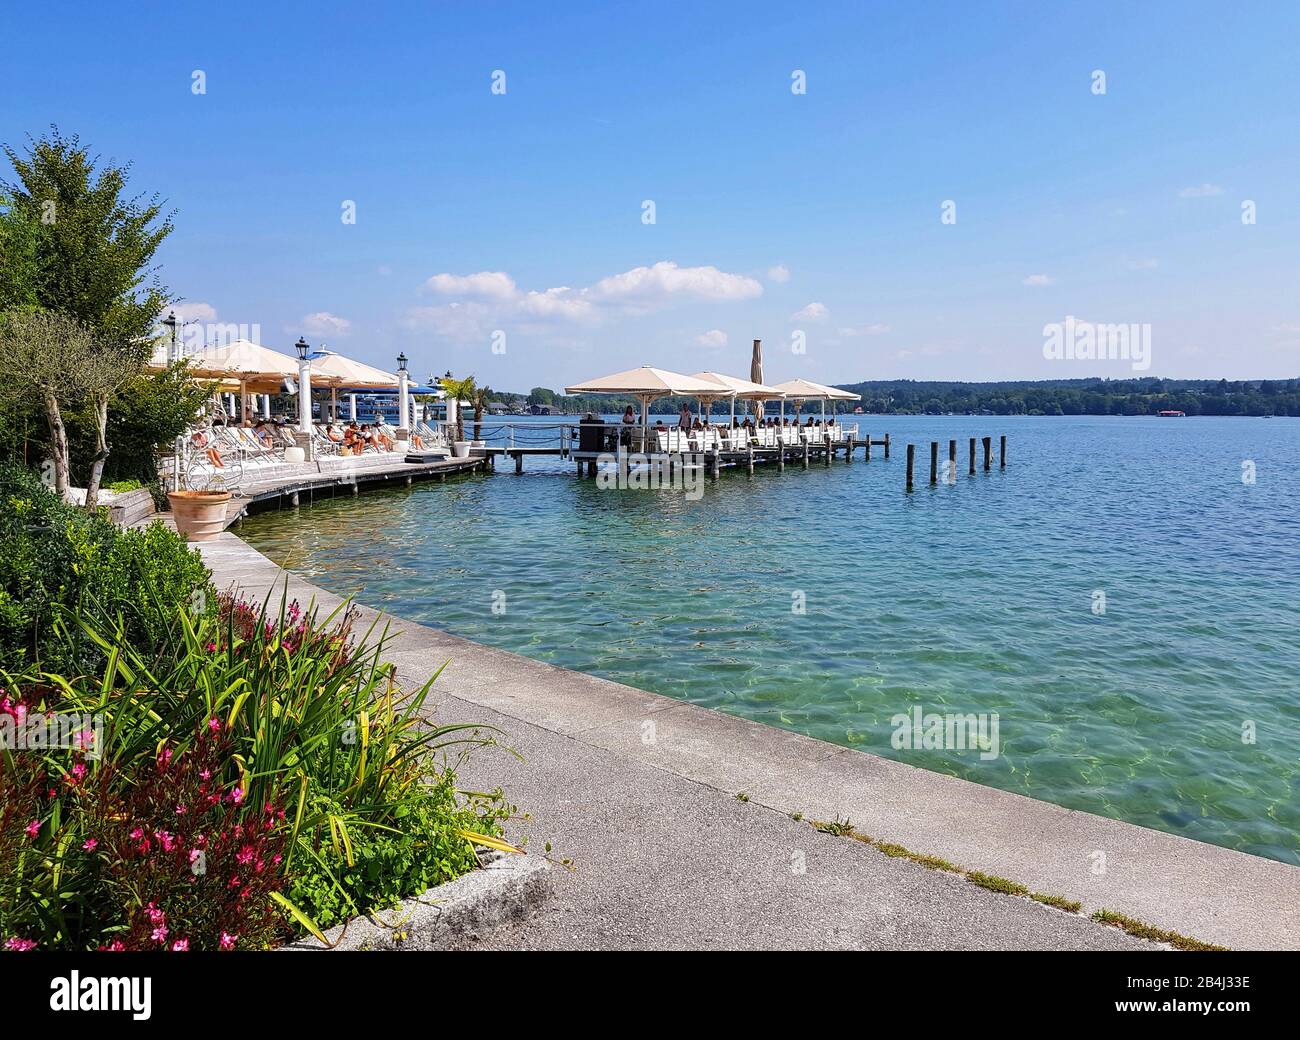 Lake Starnberg, cafe in the lake. He is the fifth largest lake in Germany. In 1886 drowned in the scandal-tale fairy tale king Ludwig II. Popular destination. Stock Photo